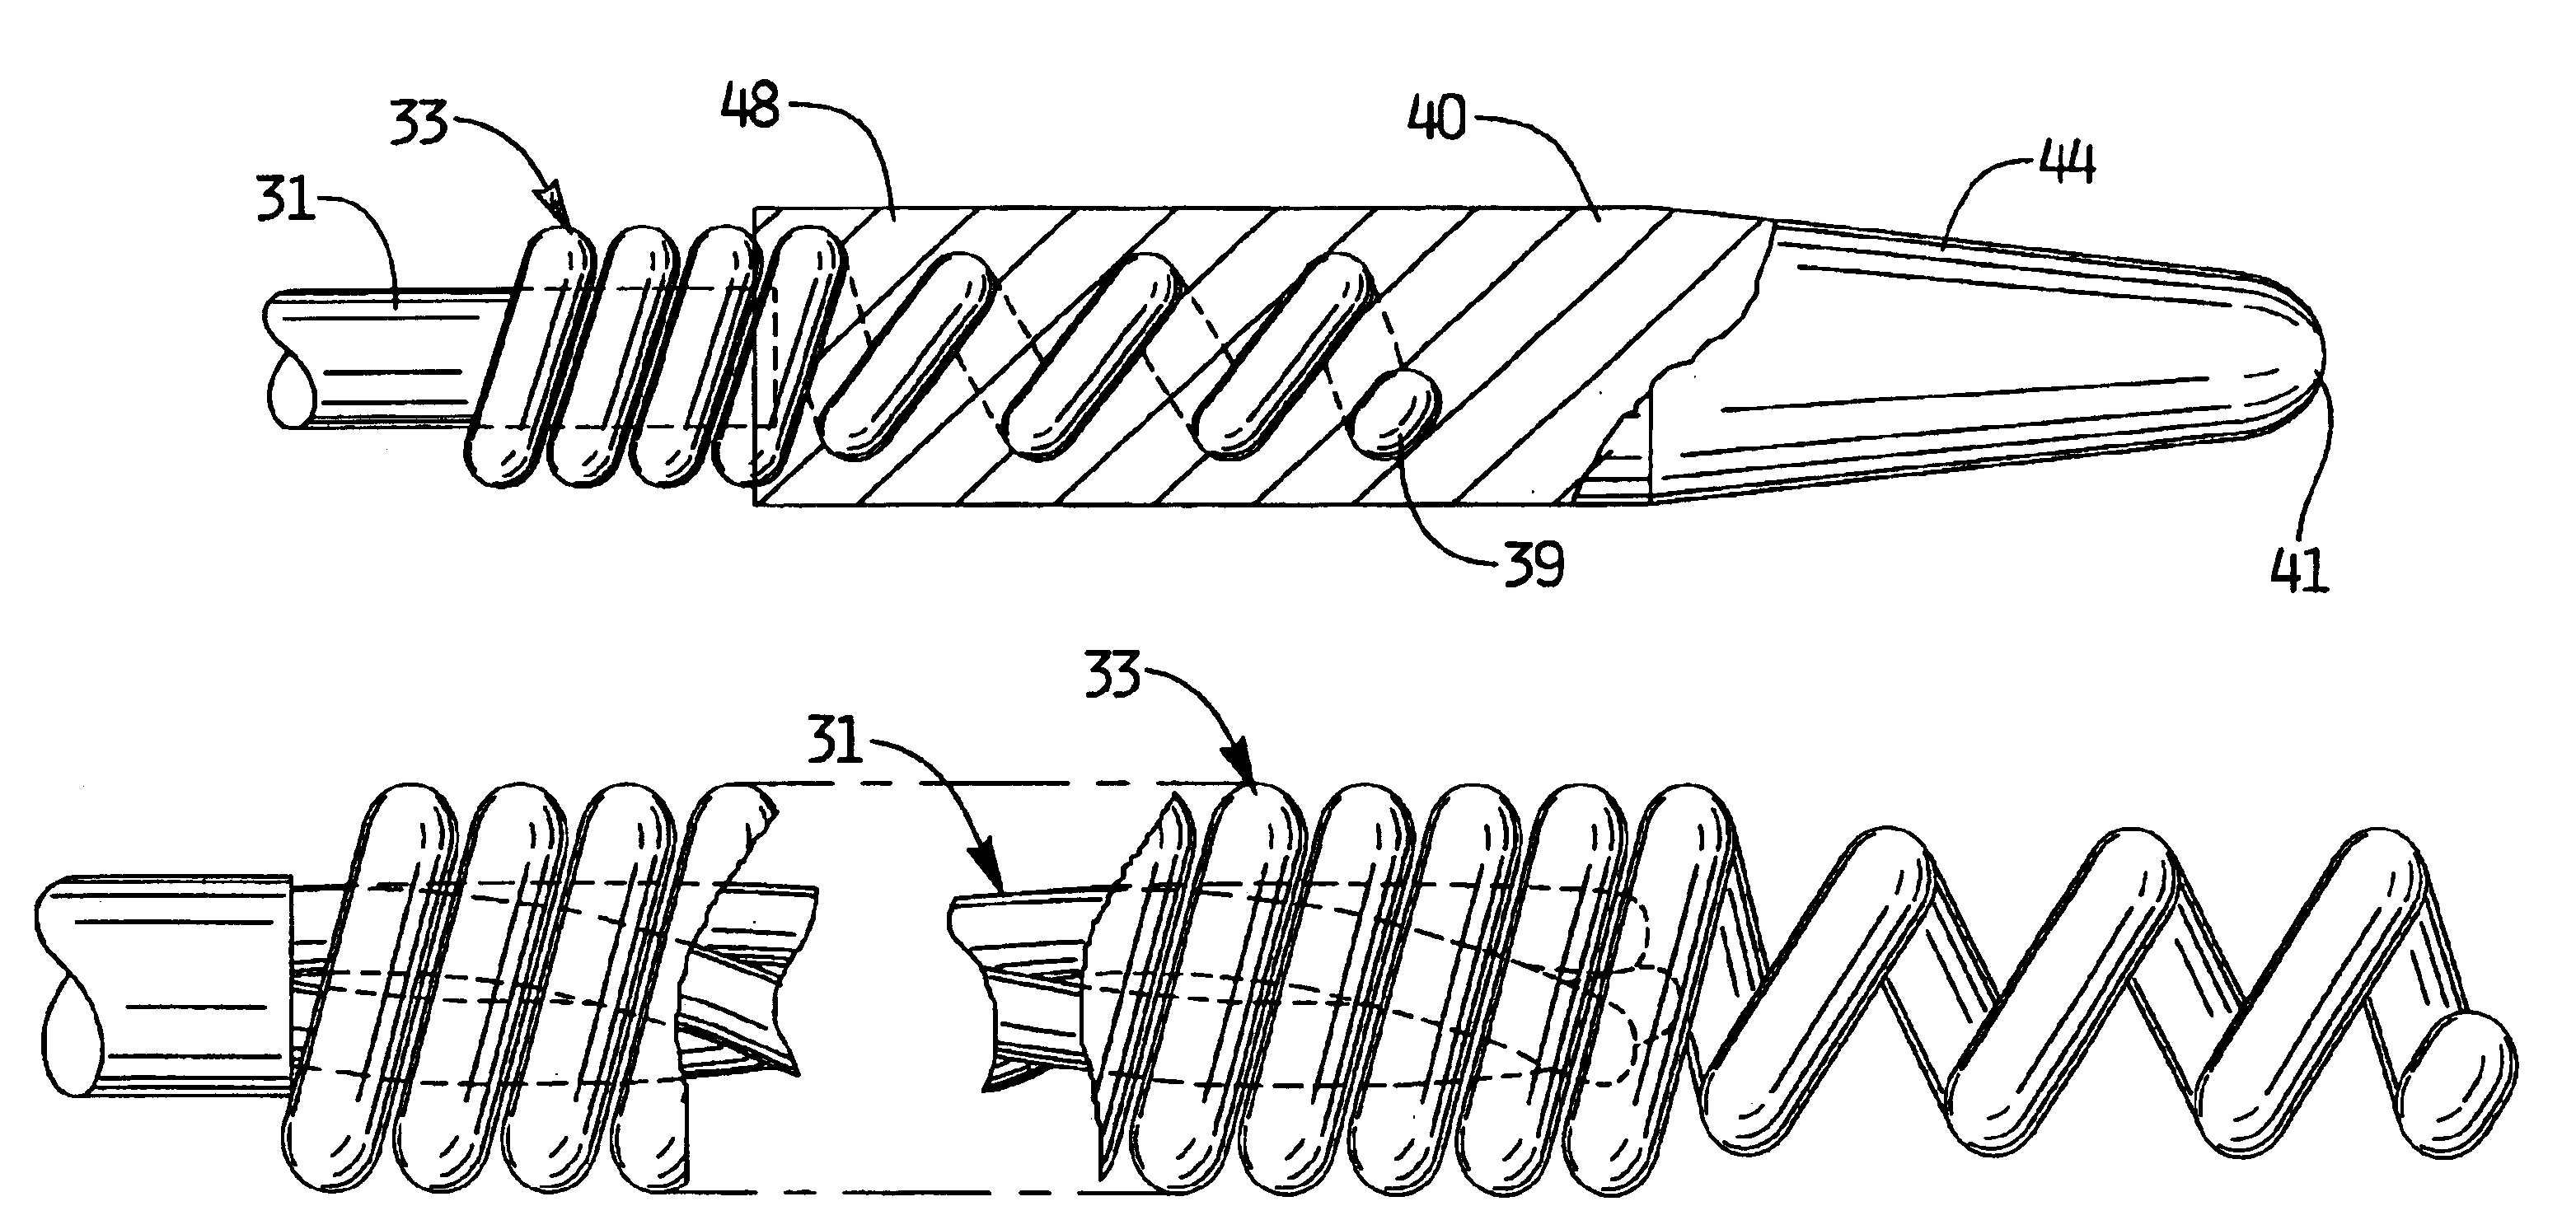 Thrombectomy device with multi-layered rotational wire